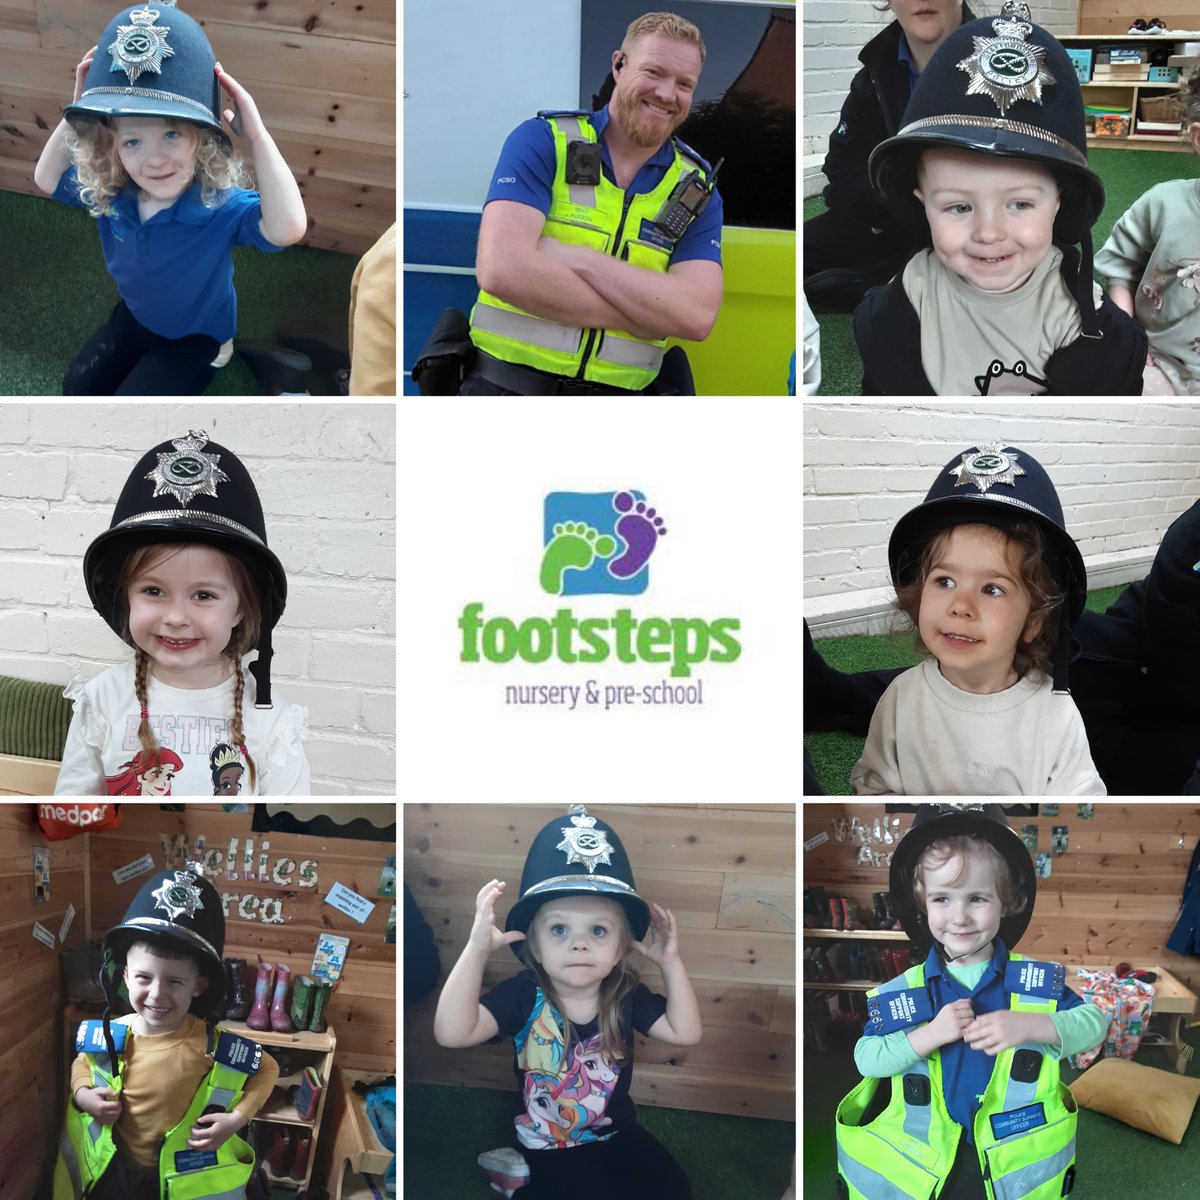 👮🏼‍♂️ Yesterday, PCSO Horton visited Footstep Nursery on Lichfield Road & talked to the children about Policing & who helps keep them safe. 🧒🏻 👧🏽 The children had a great time trying on some #Police helmets & body armour. Definitely some future recruits amongst this lot #Tamworth